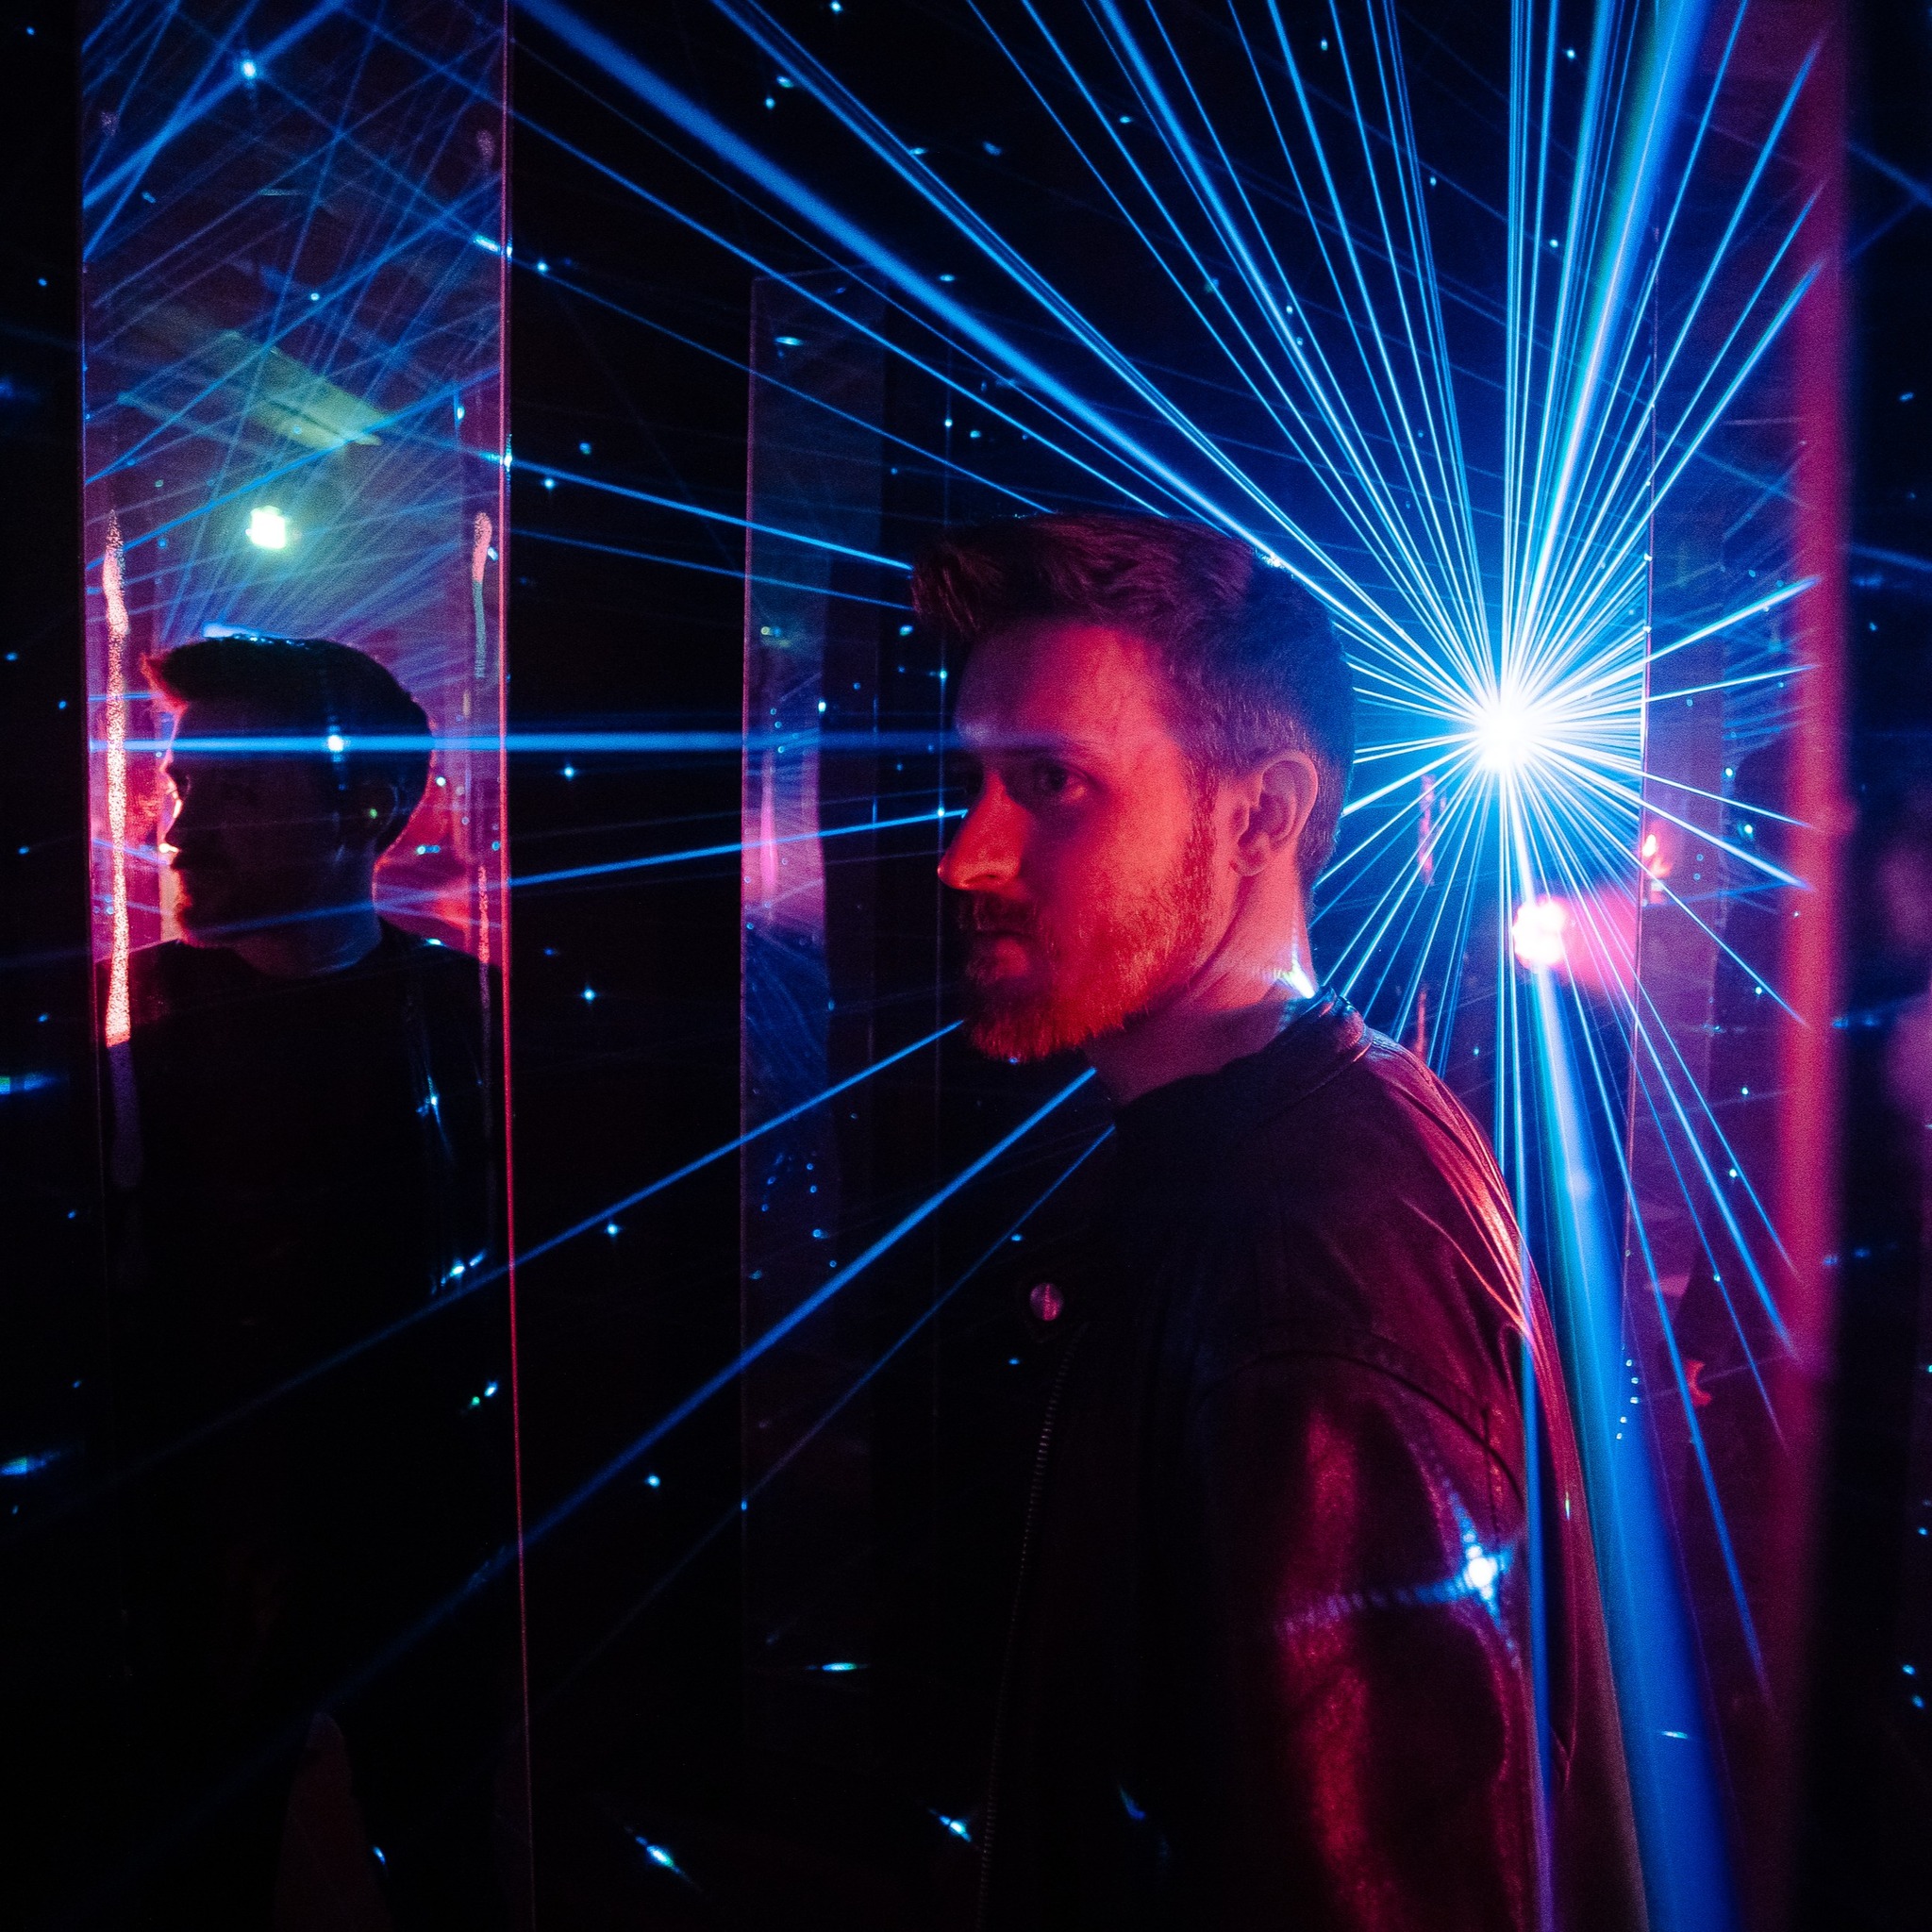 WIN 1 of 10 Double Passes To Mirror Mirror At Illuminate Adelaide!